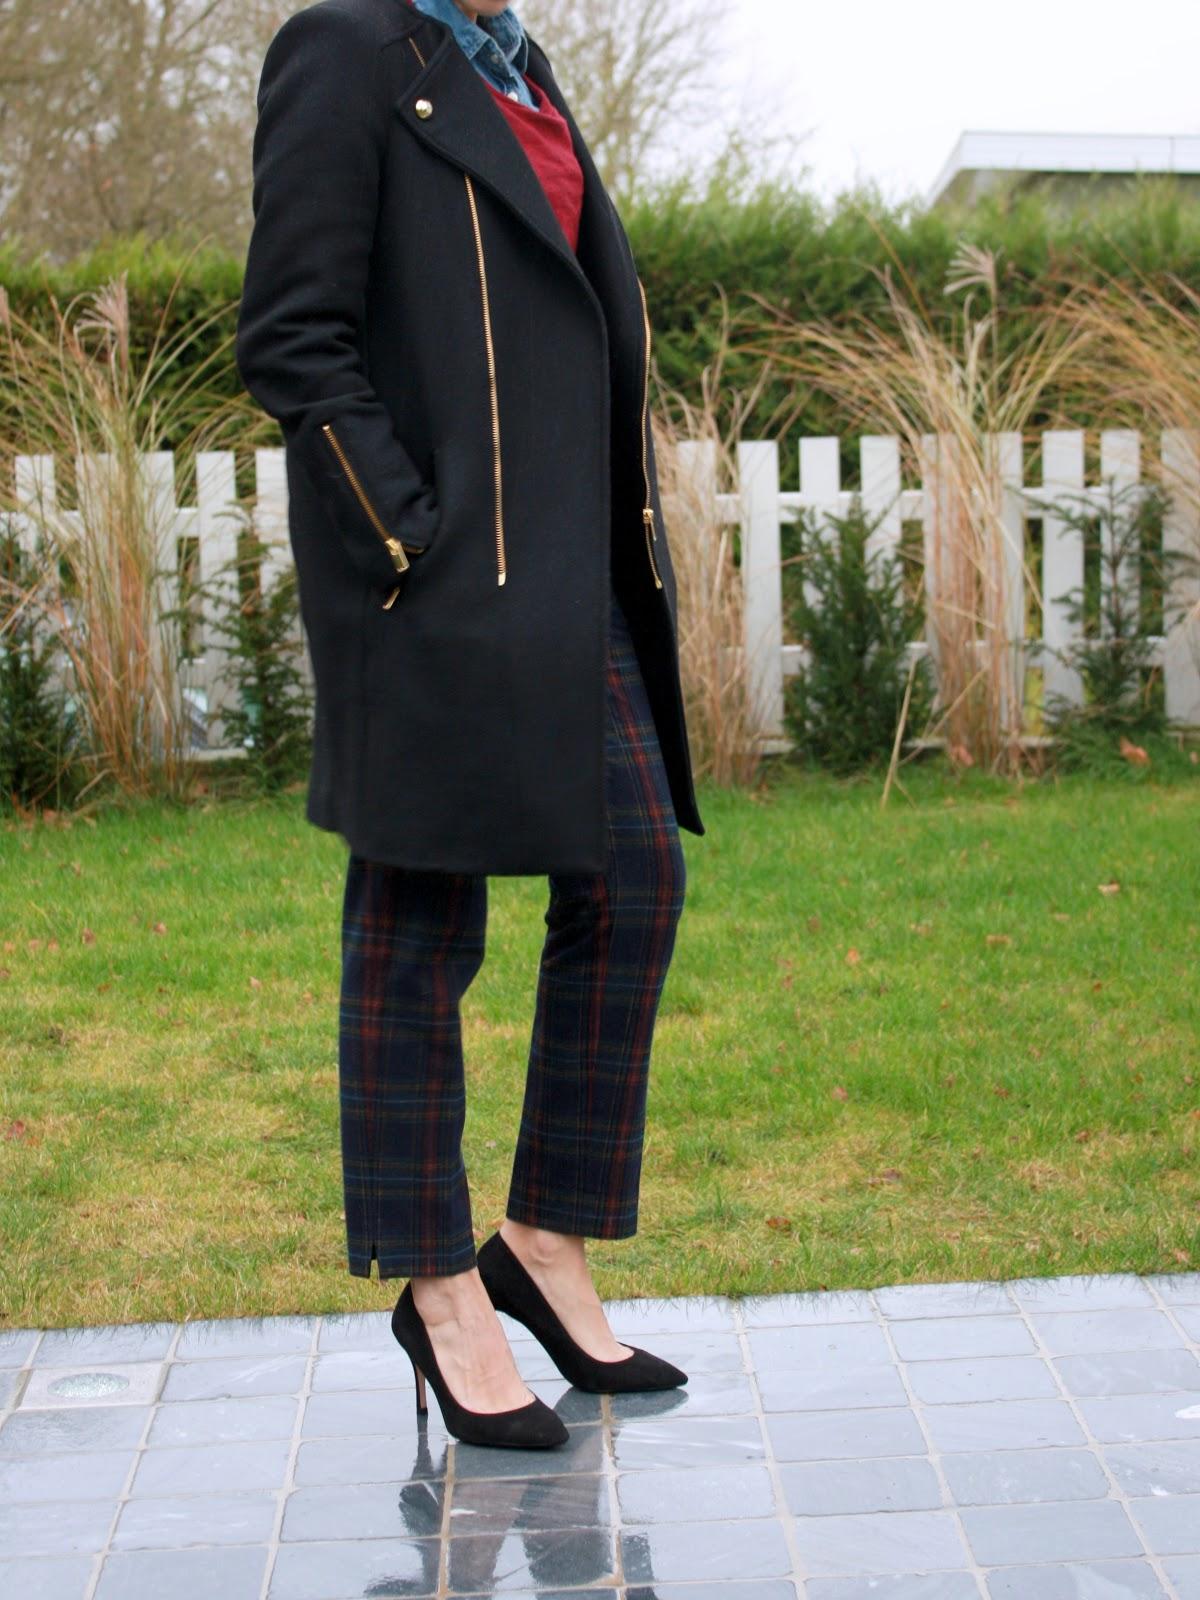 The plaid trousers and the black suede pumps